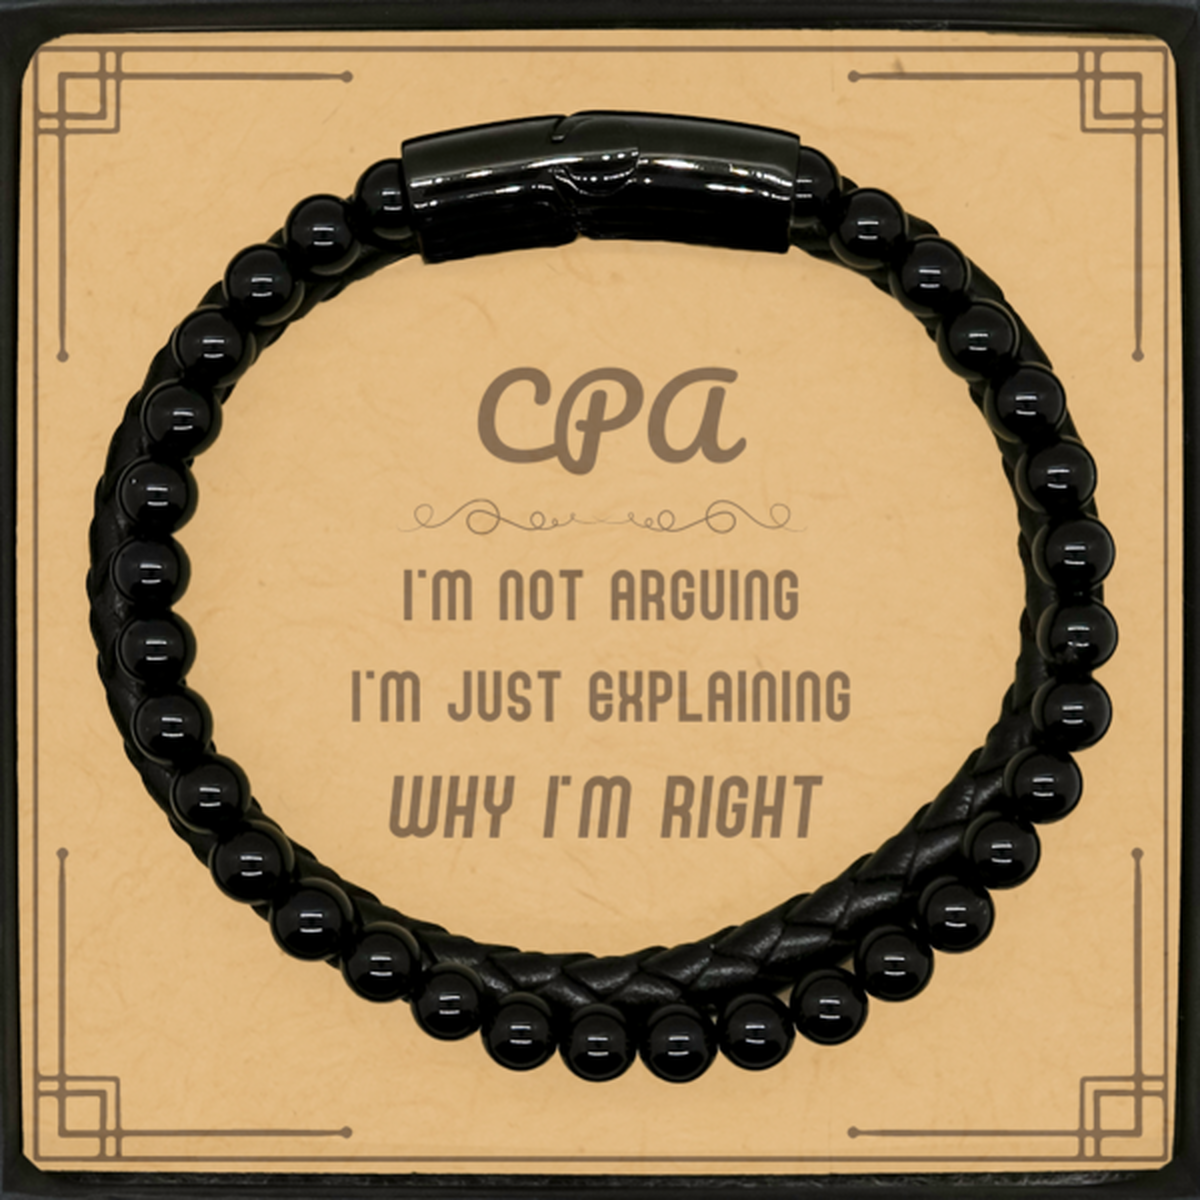 CPA I'm not Arguing. I'm Just Explaining Why I'm RIGHT Stone Leather Bracelets, Funny Saying Quote CPA Gifts For CPA Message Card Graduation Birthday Christmas Gifts for Men Women Coworker